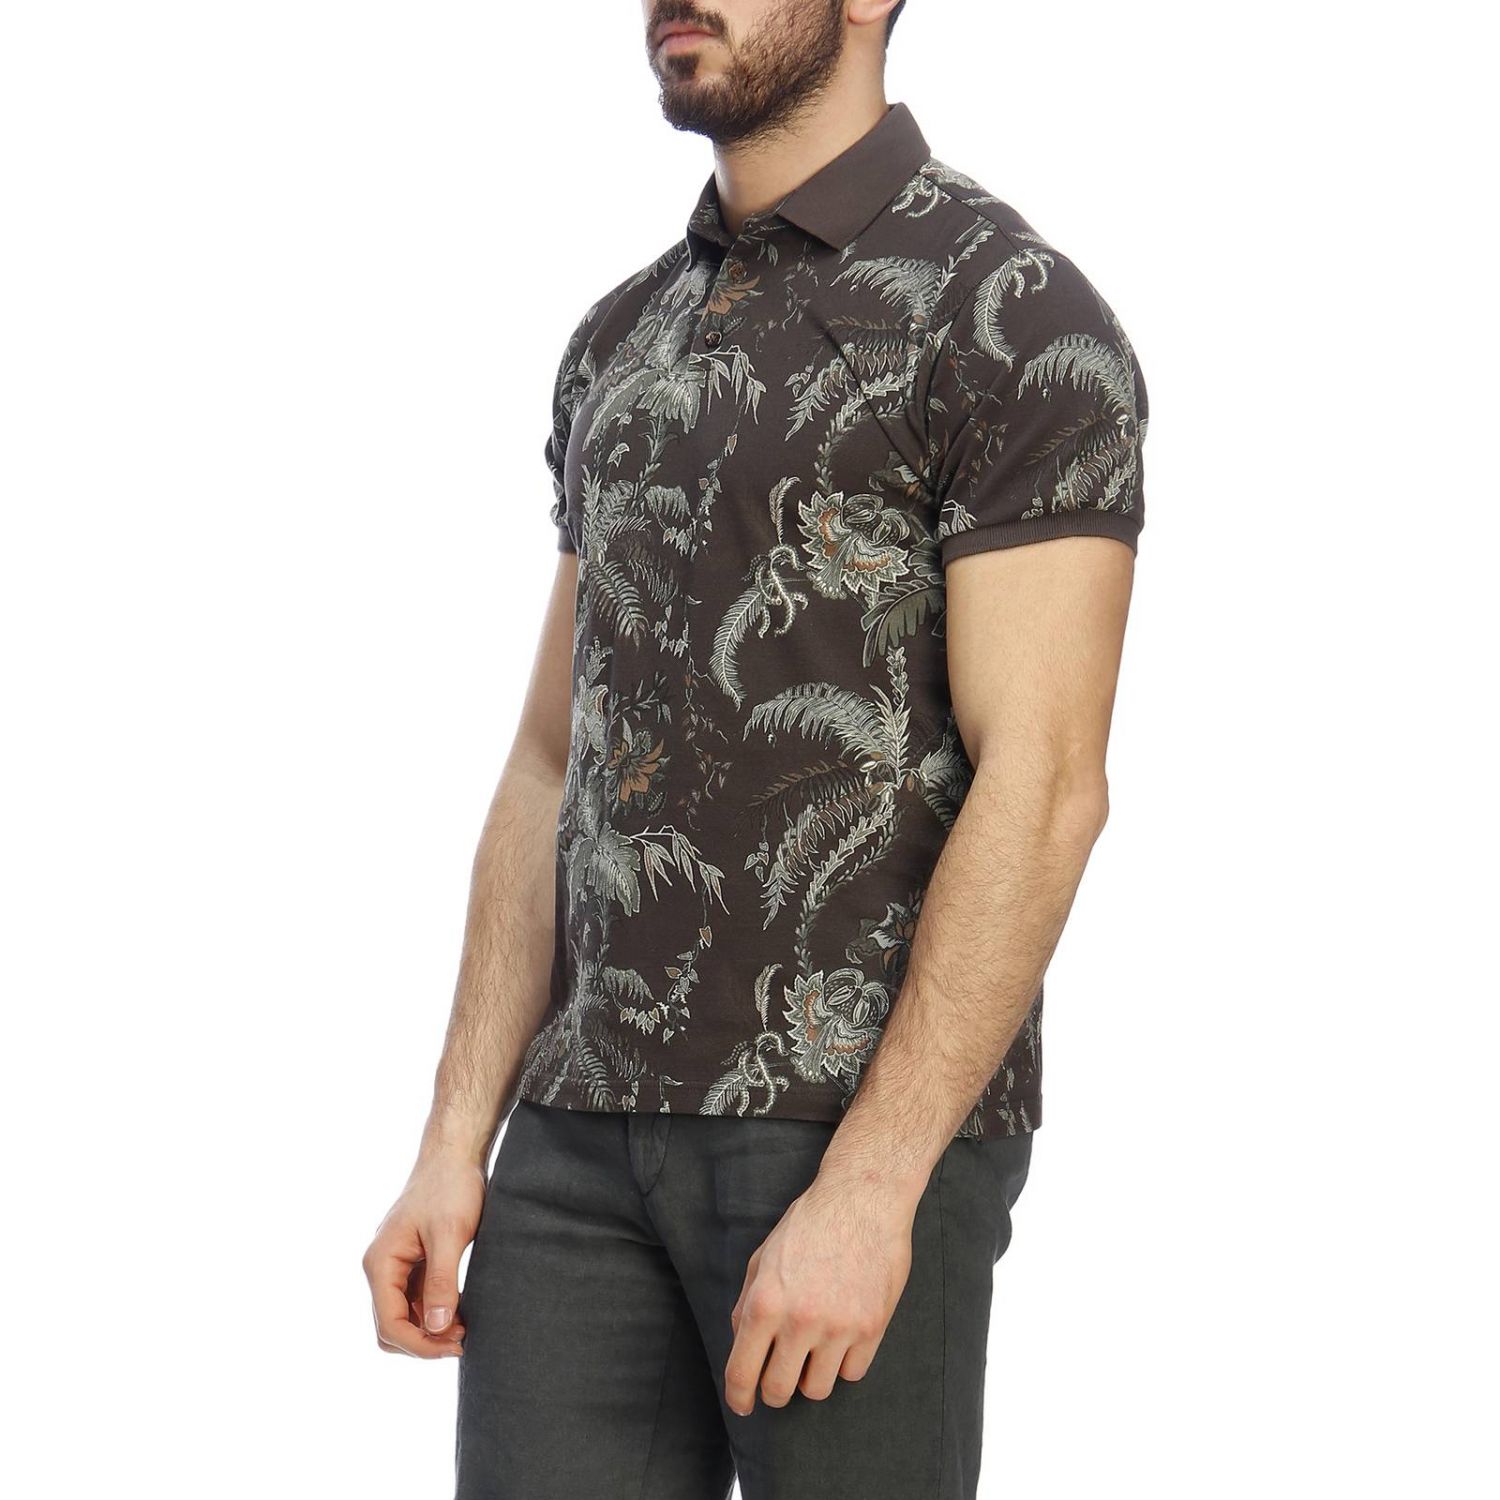 Etro Outlet: T-shirt men - Military | T-Shirt Etro 1Y800 4089 GIGLIO.COM